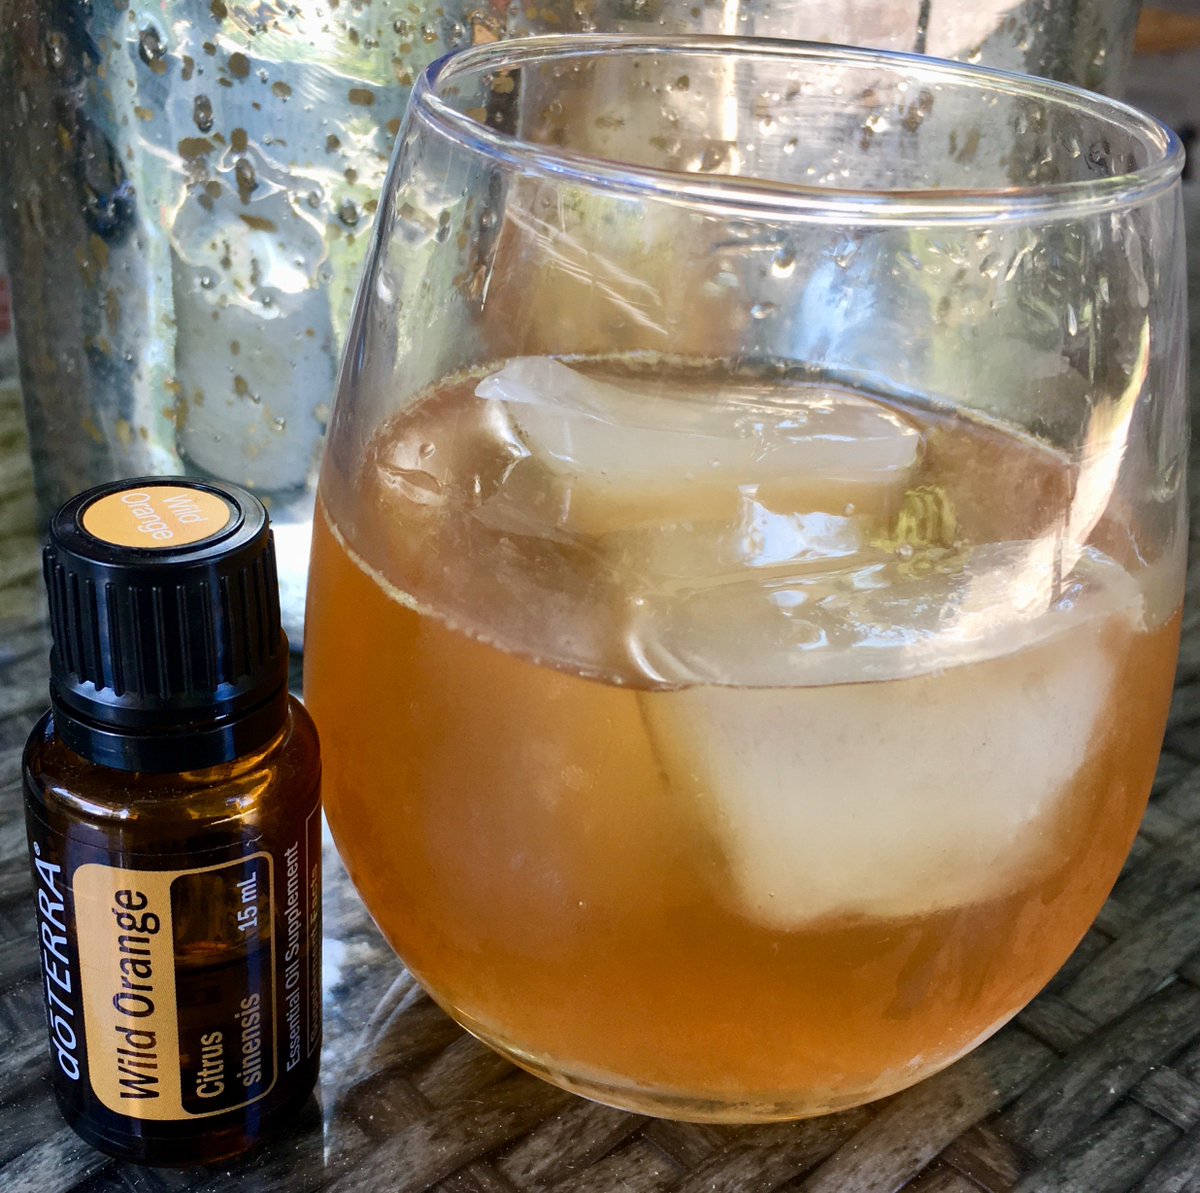 My home brewed kombucha that traveled to me from Cincinnati Ohio and with me to Southeast Asia and back to California. Refreshing and healthy with doTERRA Wild Orange Oil ow.ly/9sh530kxkXL #shespartofthefamily #doterra #wildorange #kombucha #rawfood #enzymes